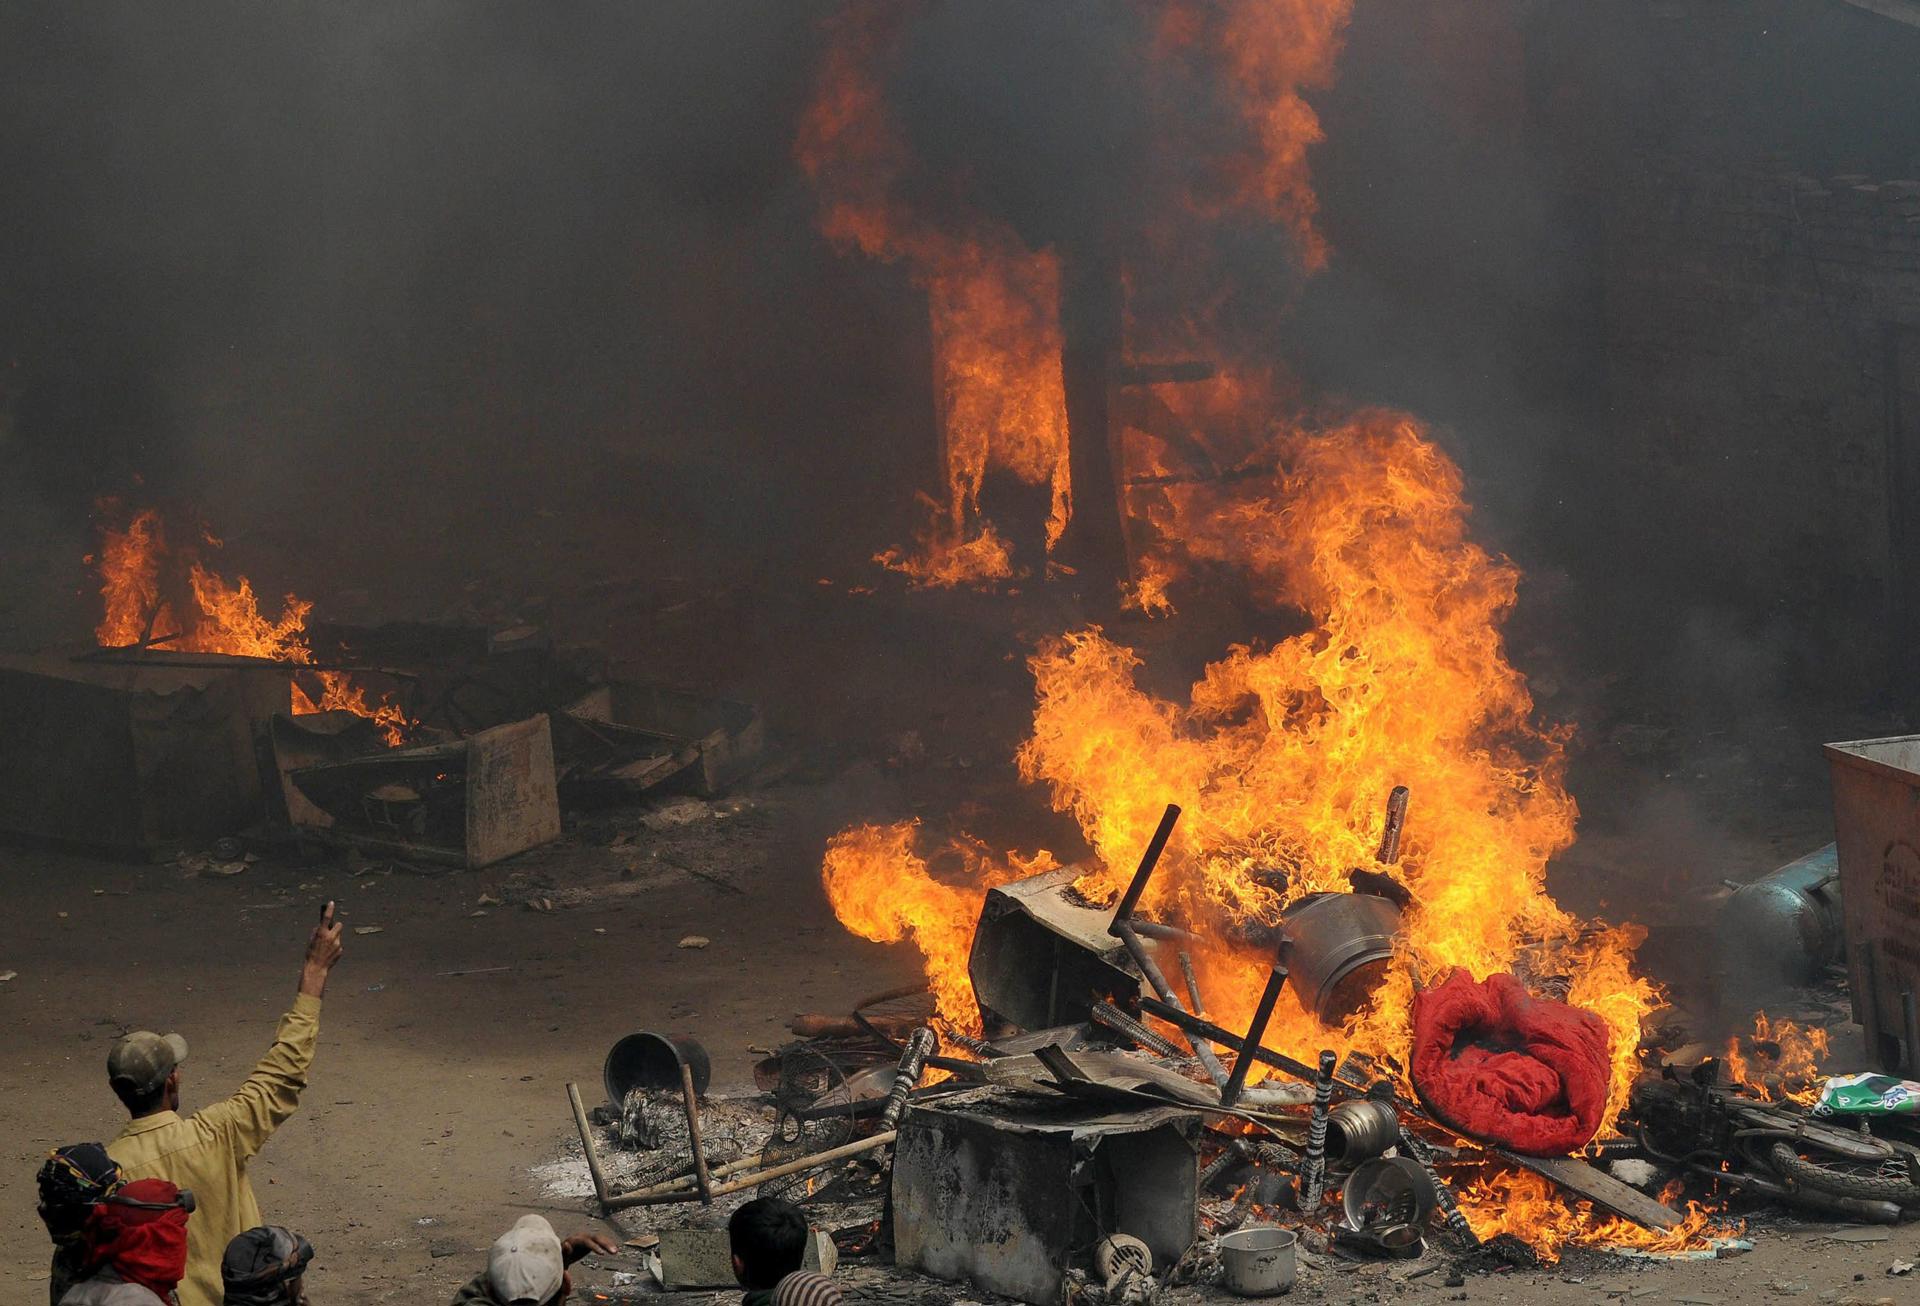 A file photo shows people destroying the belongings of a man after allegations of blasphemy in Lahore, Pakistan, 09 March 2013. EFE-EPA/File/RAHAT DAR